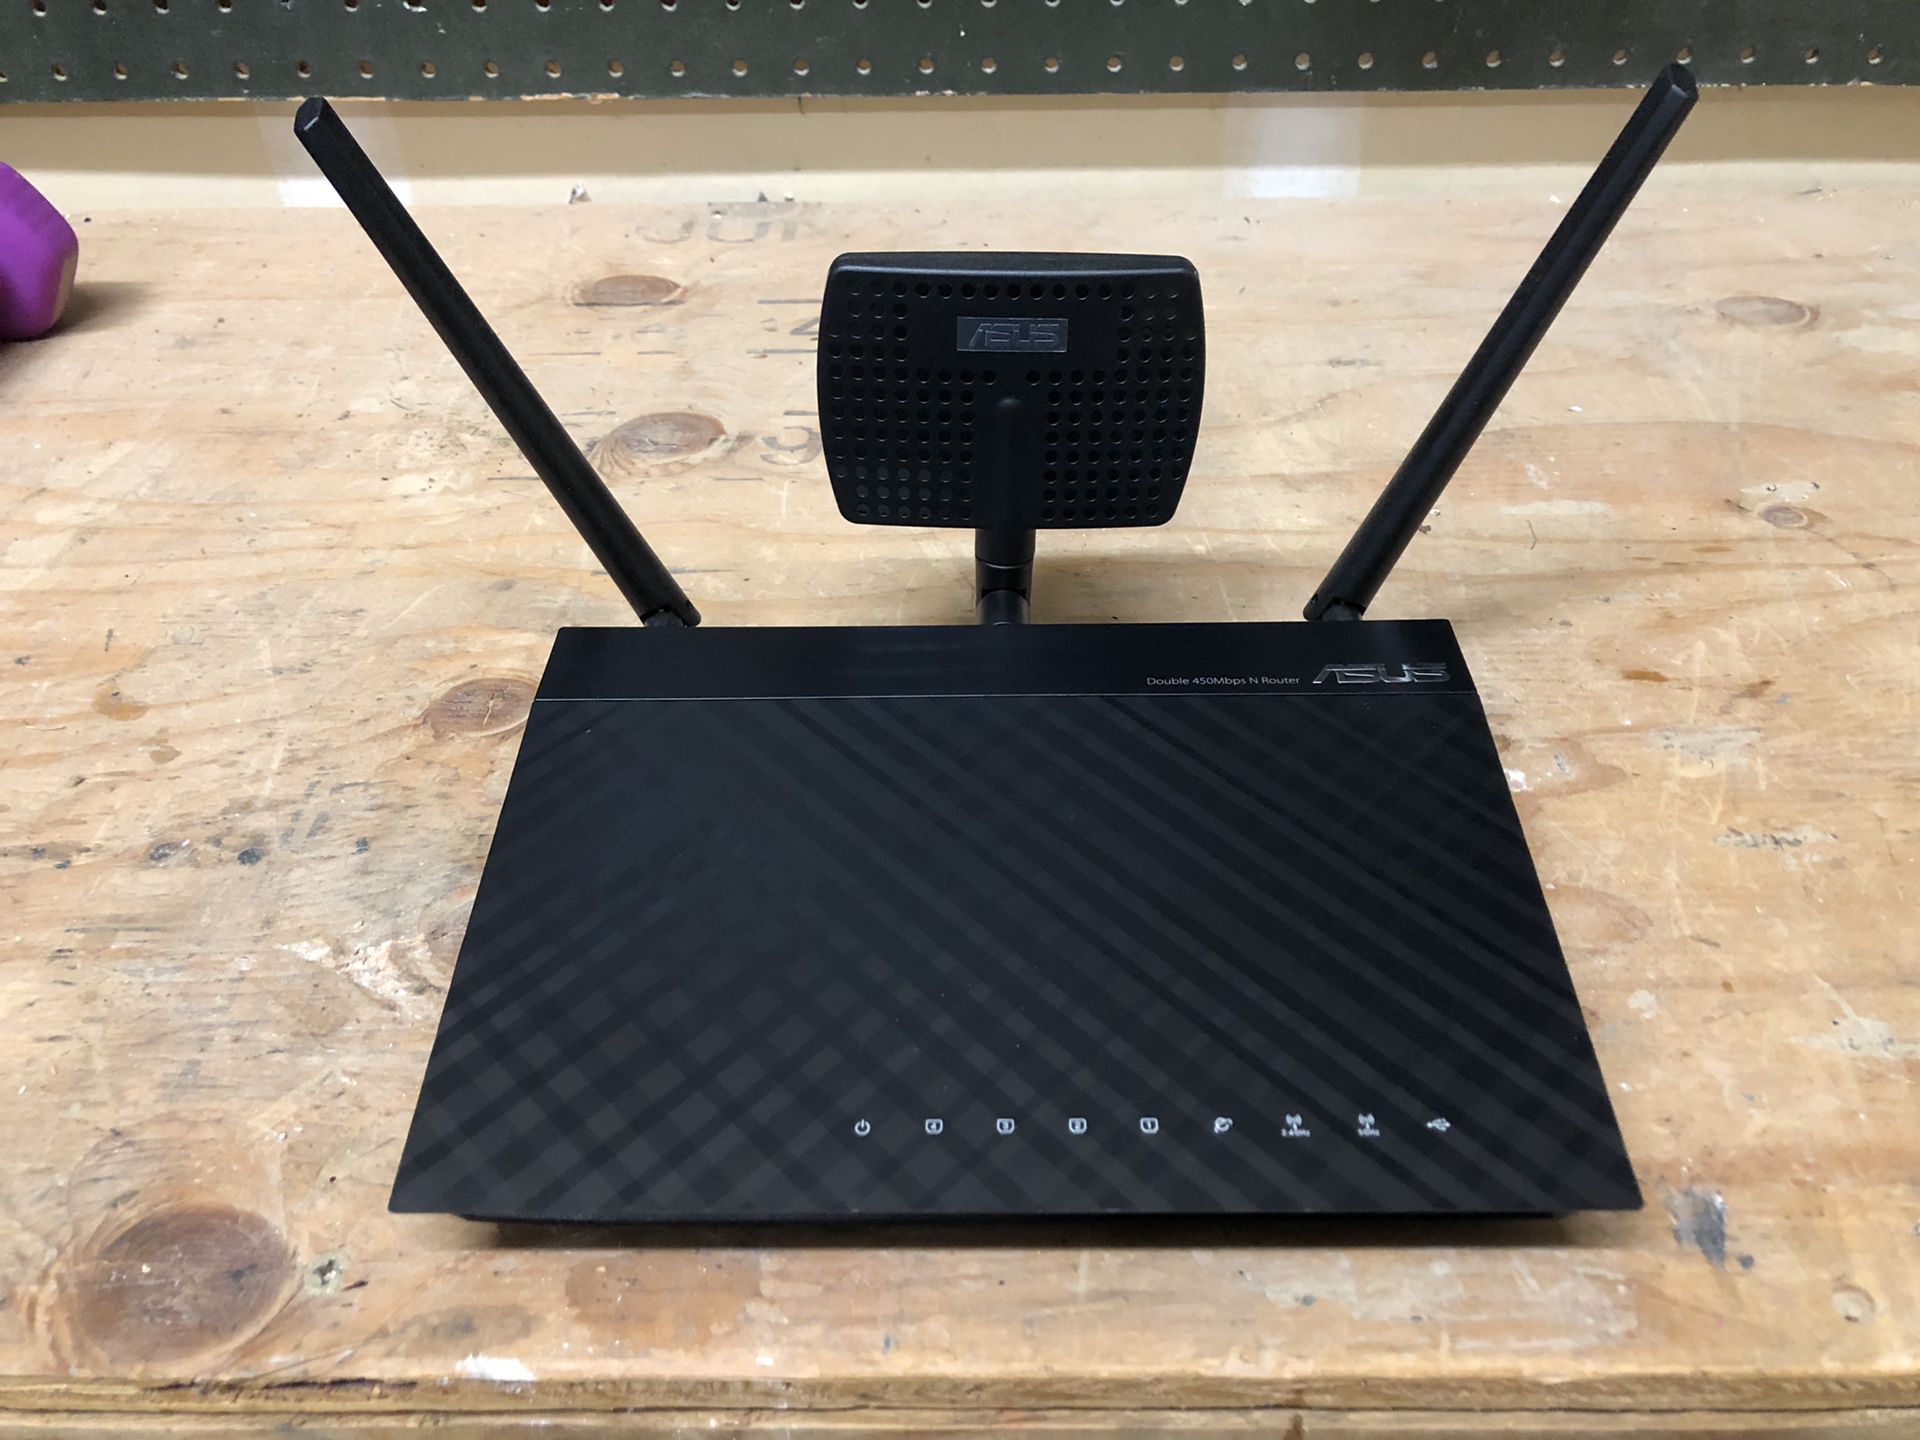 asus rt-n66r router